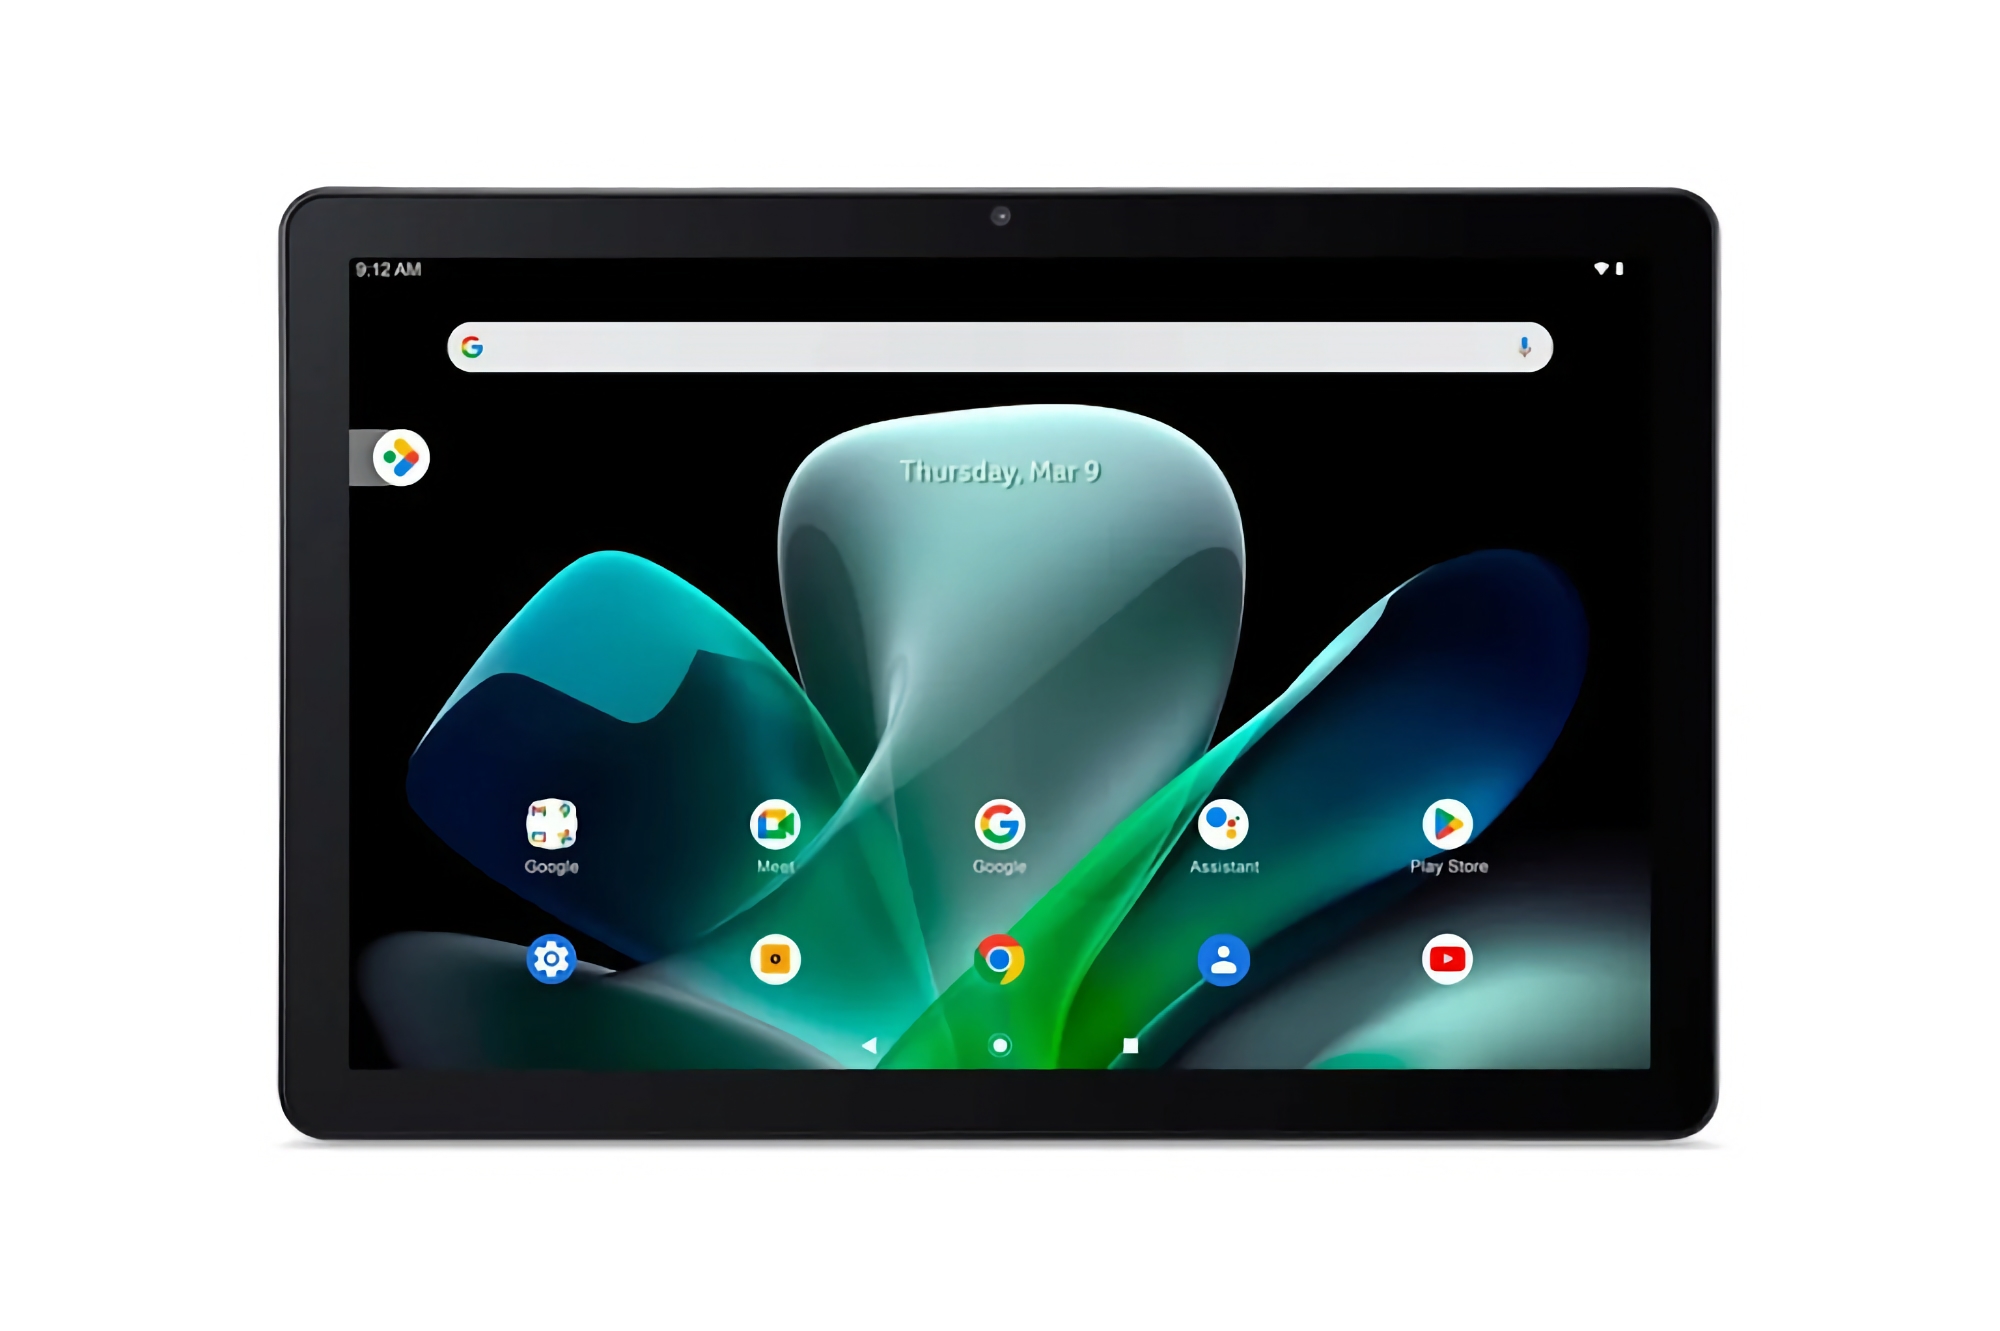 Acer Iconia Tab M10: tablet with 10.1-inch screen, MediaTek Kompanio 500 chip and 6000 mAh battery for $149